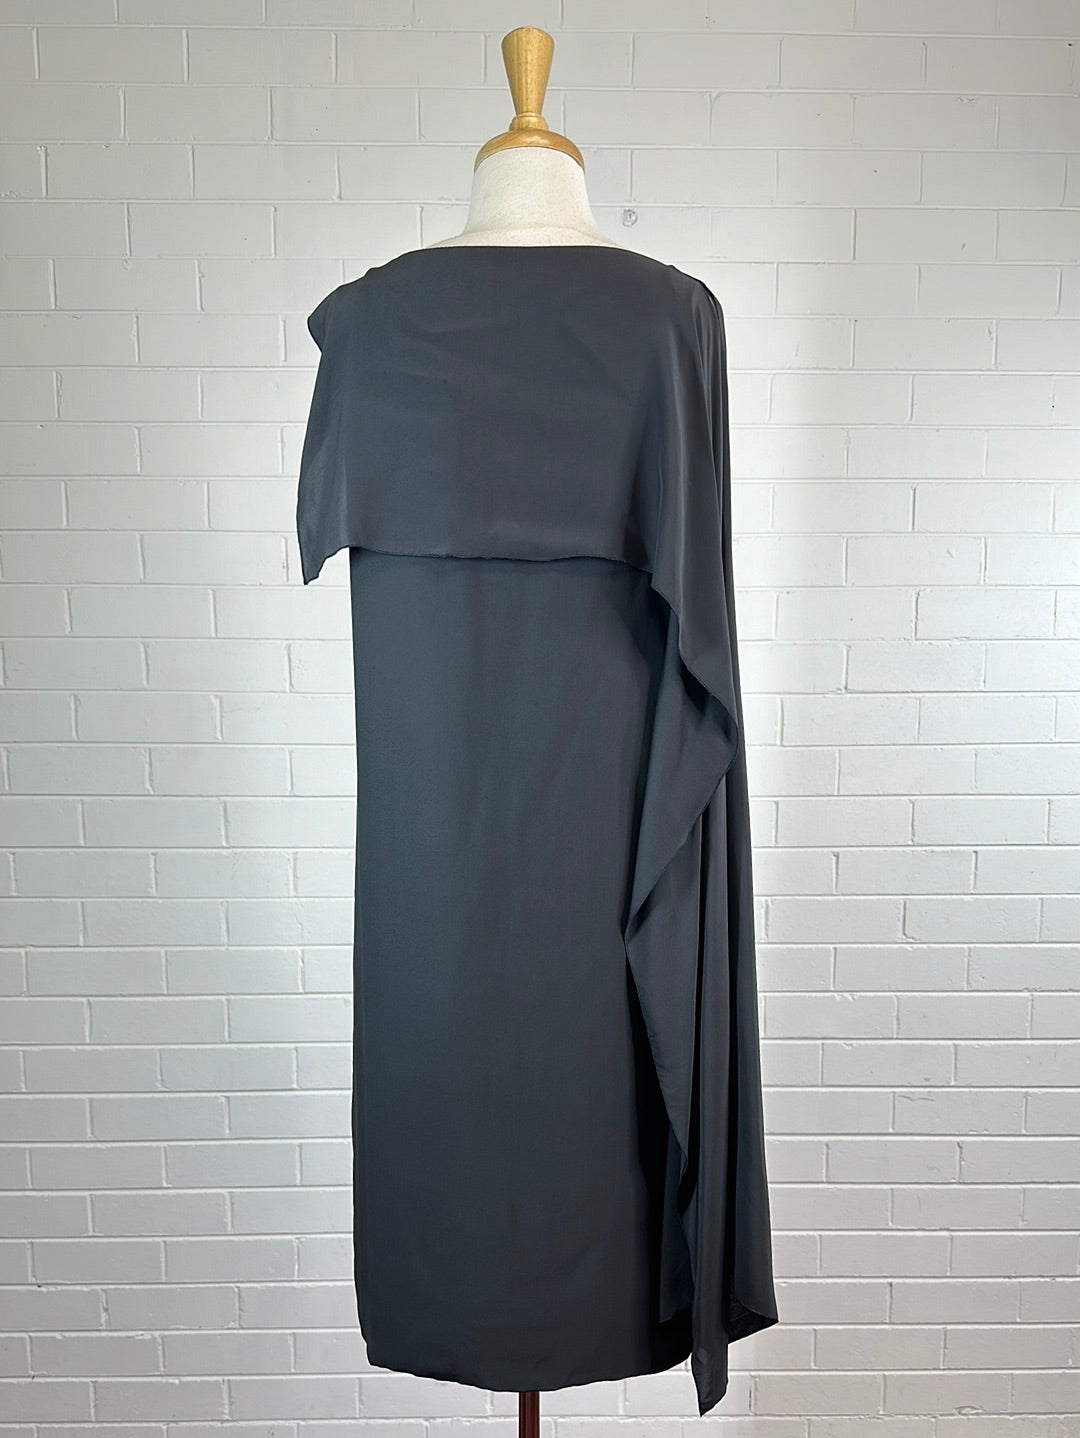 Scanlan Theodore | dress | size 10 | knee length | new with tags